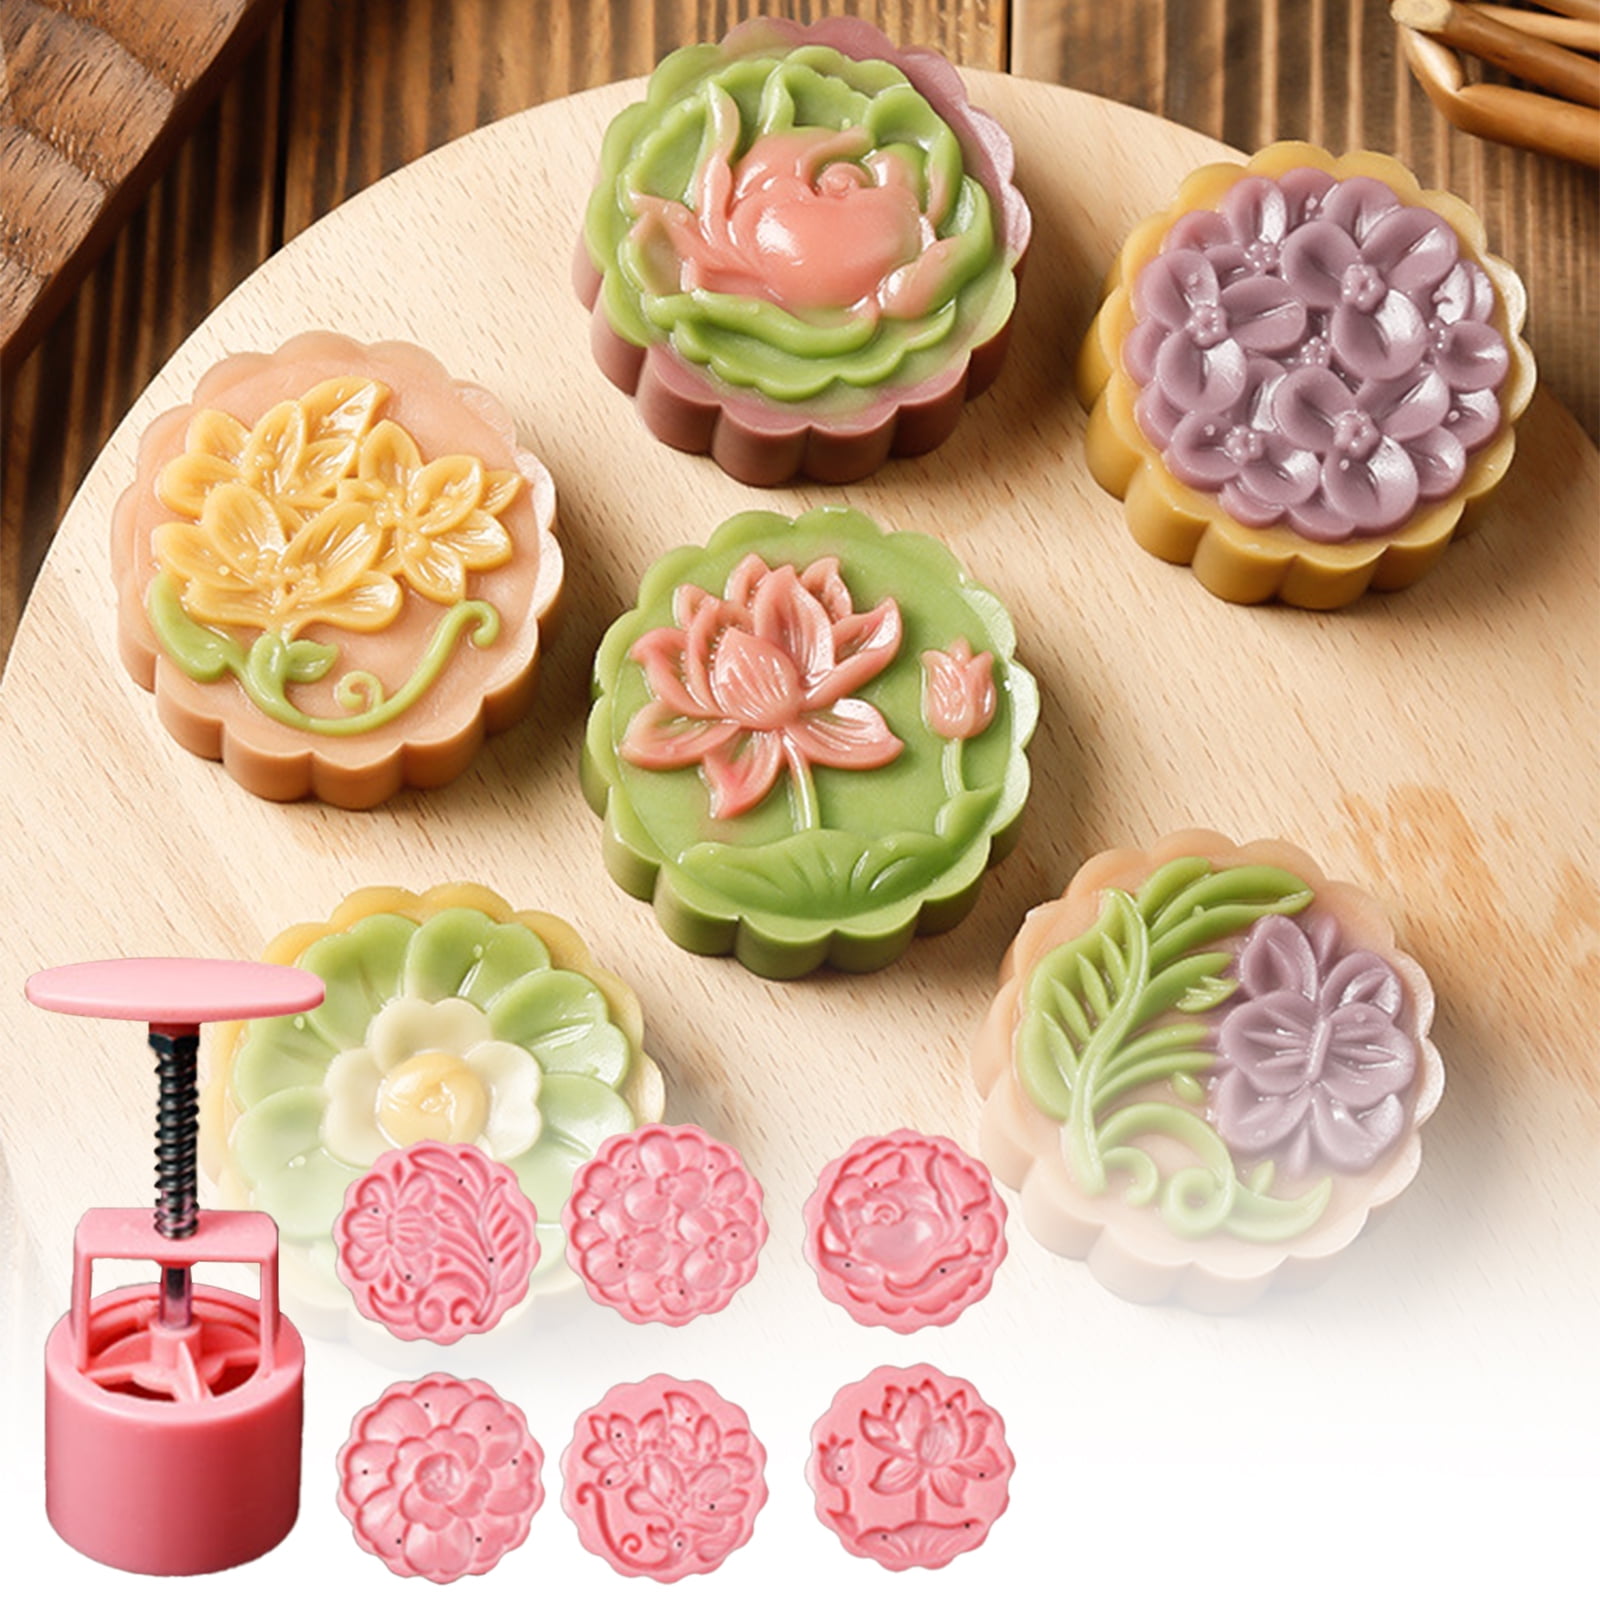 Plastic Cookie Stamps Hexagon Flower Pattern Mooncake Mold Hand-Pressure Moon  Cake Maker DIY Pastry Tool for Mid-Autumn - buy Plastic Cookie Stamps  Hexagon Flower Pattern Mooncake Mold Hand-Pressure Moon Cake Maker DIY